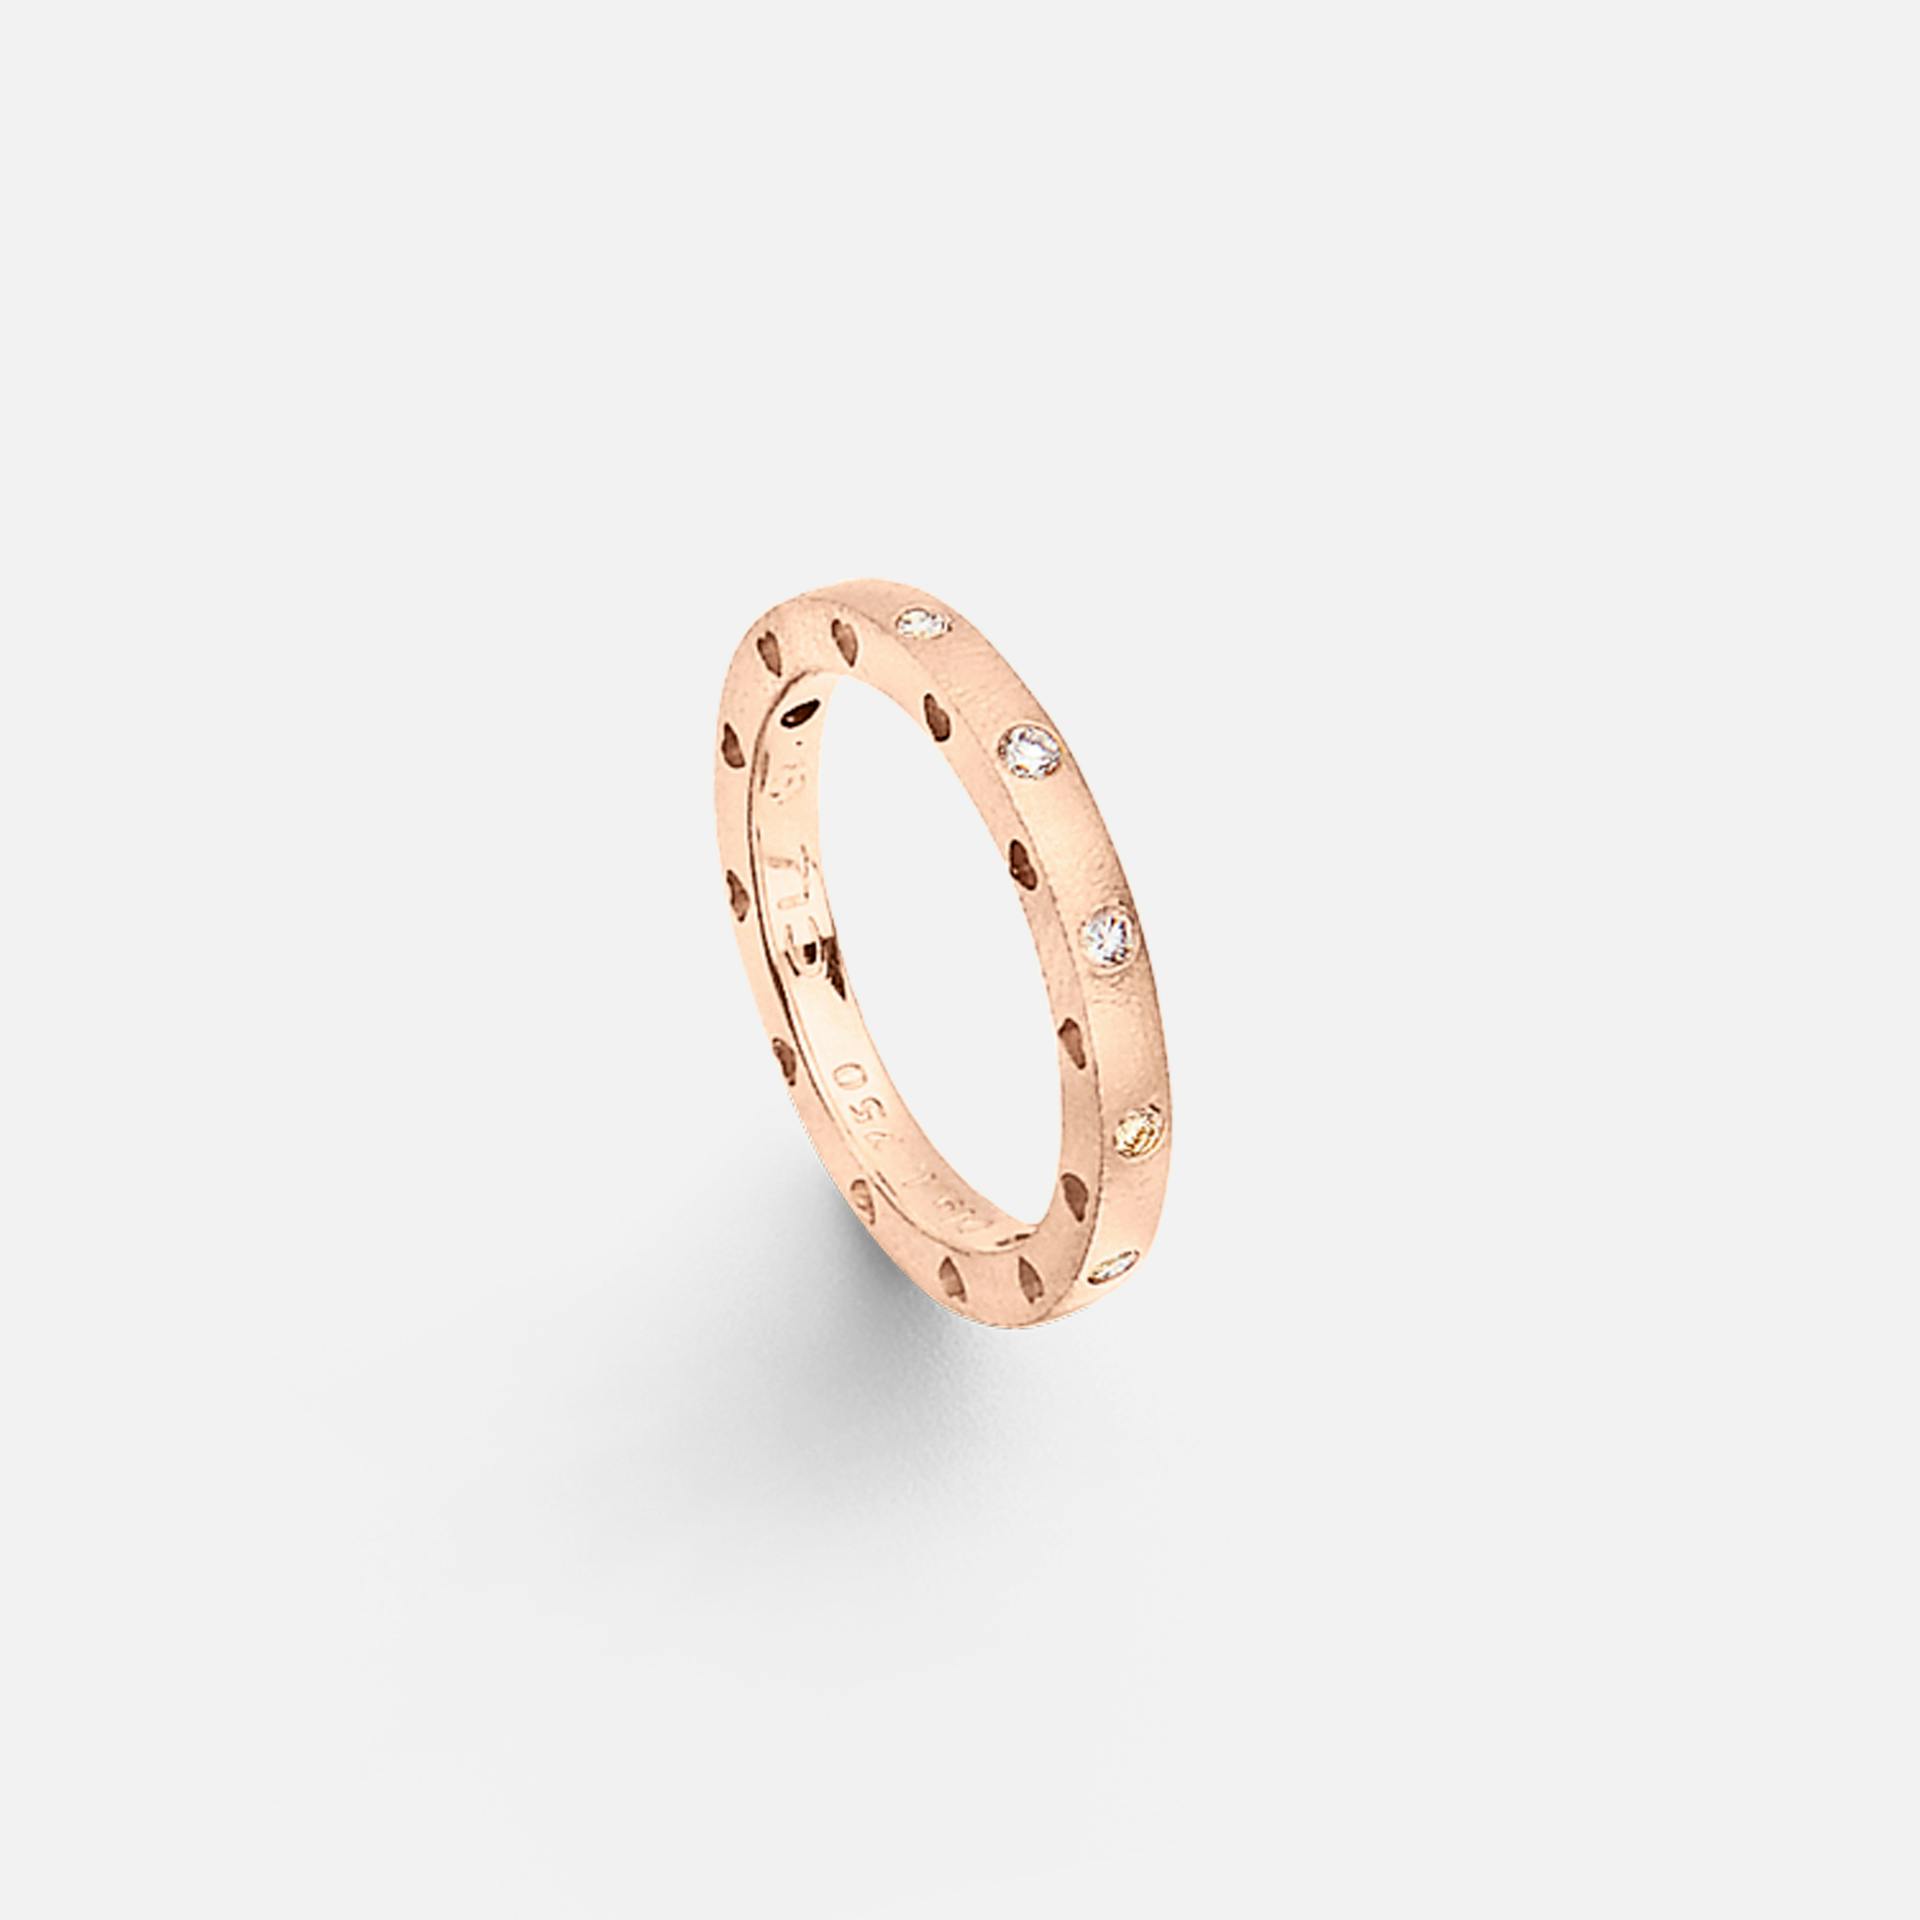 Forever Love Ring in Textured Rose Gold with Diamonds  |  Ole Lynggaard Copenhagen